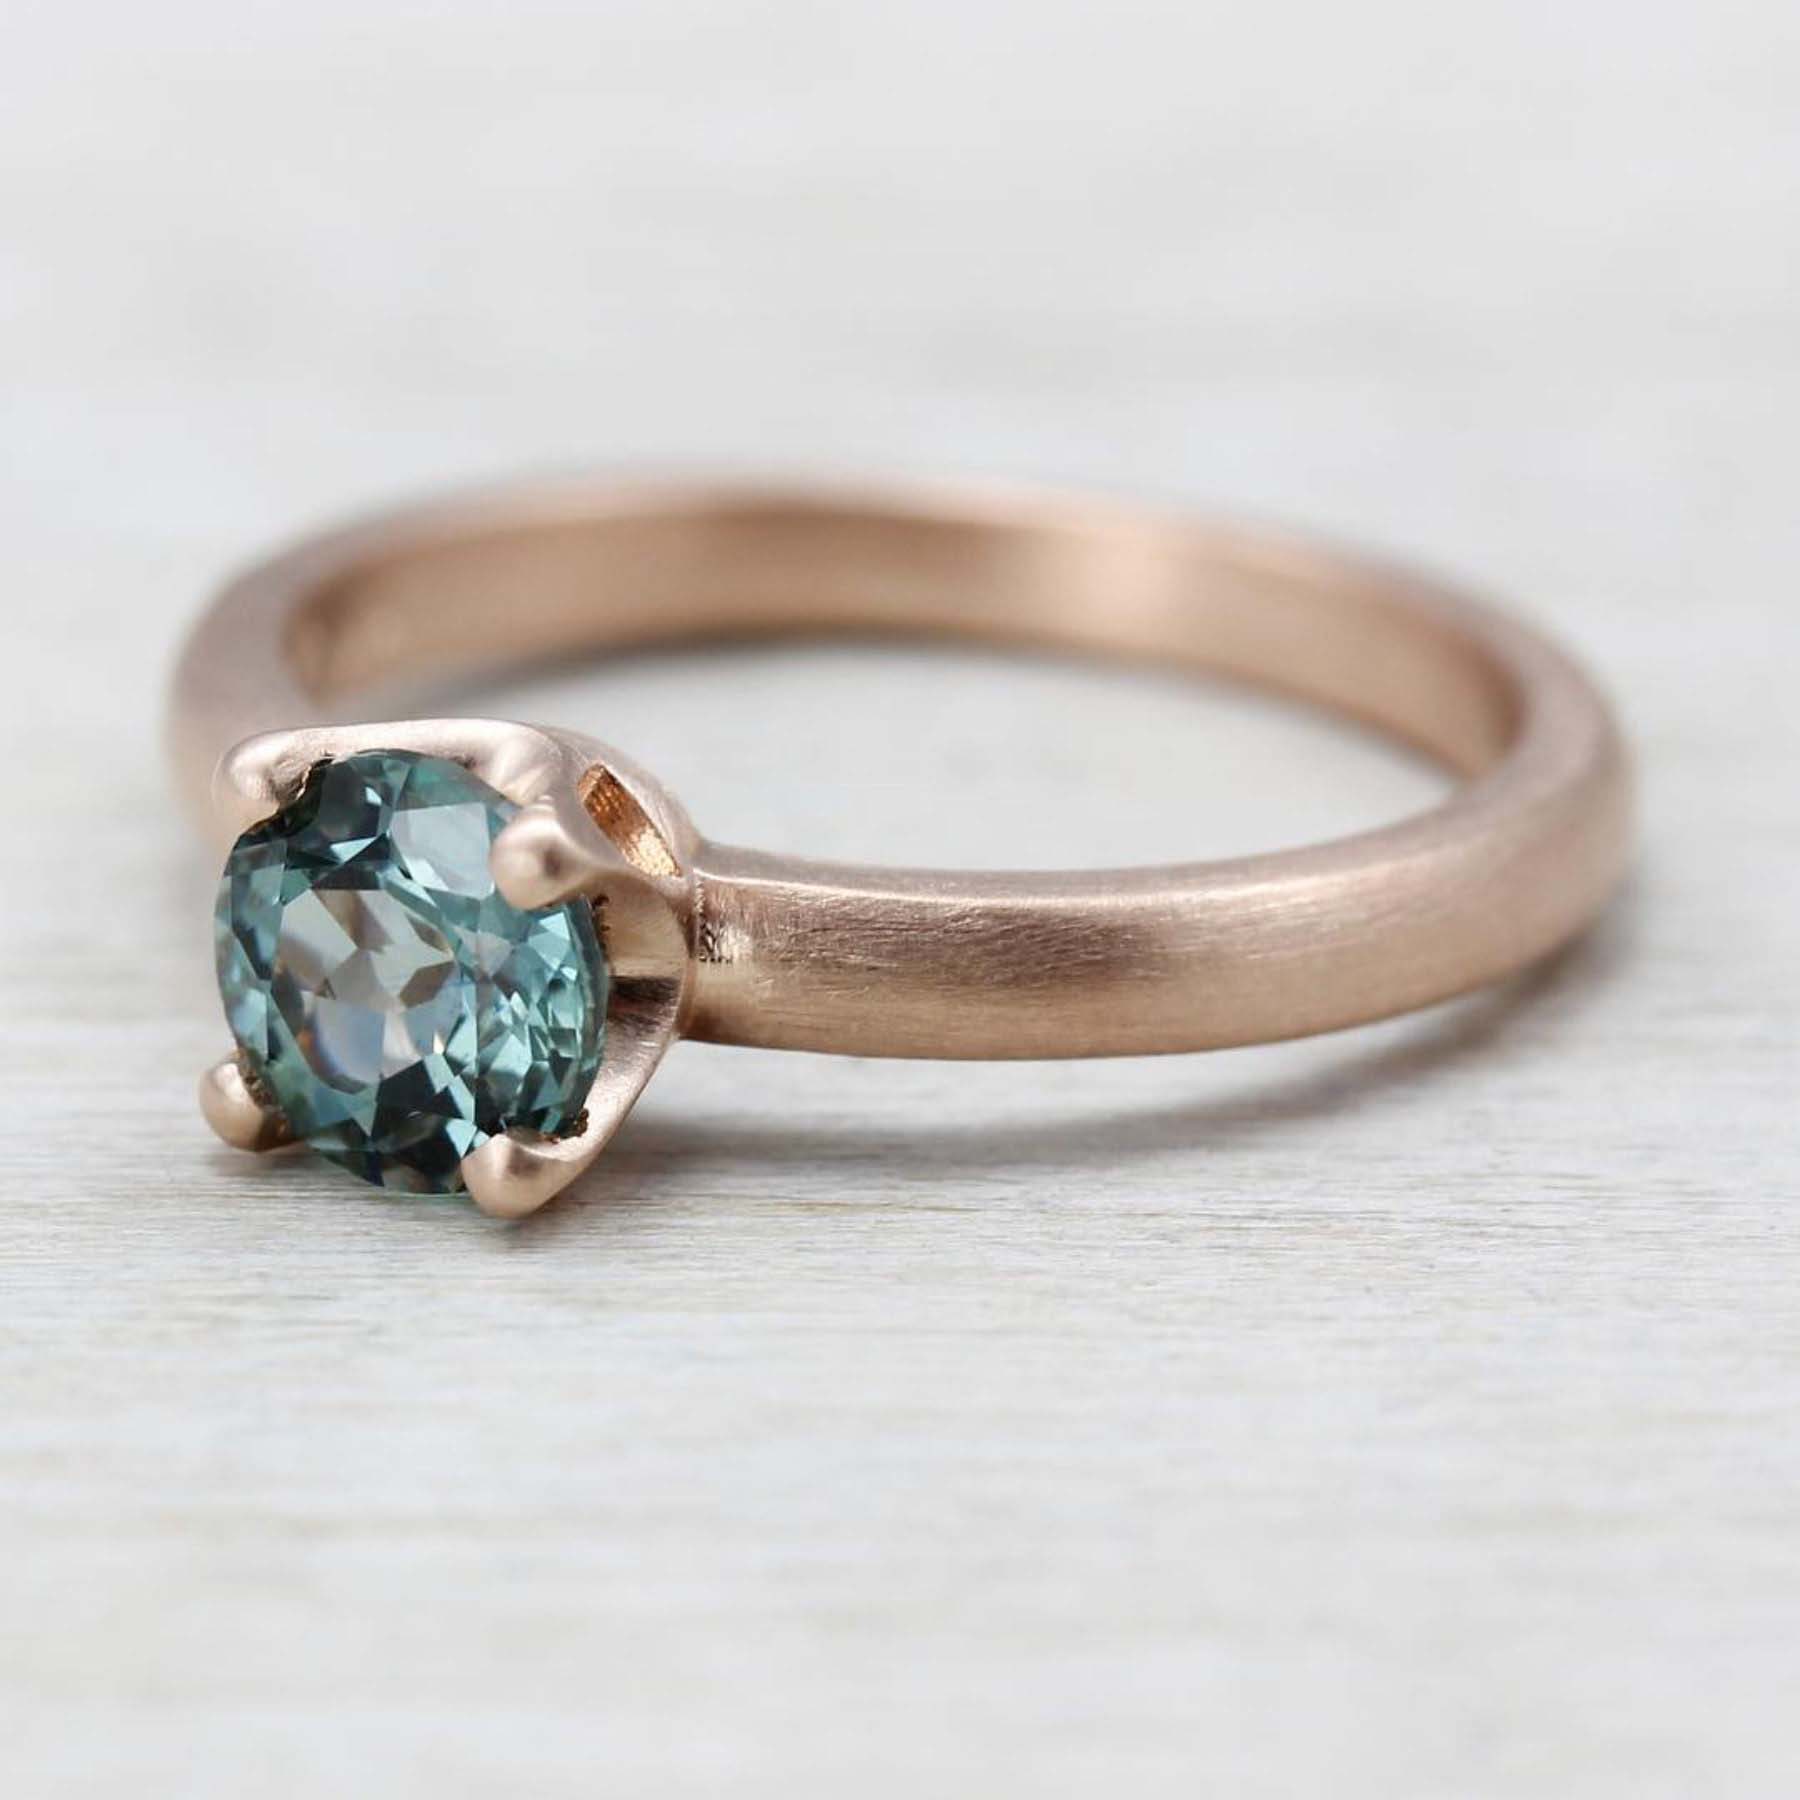 rose gold engagement ring with aqua blue fair trade Malawi sapphire by Aide-memoire